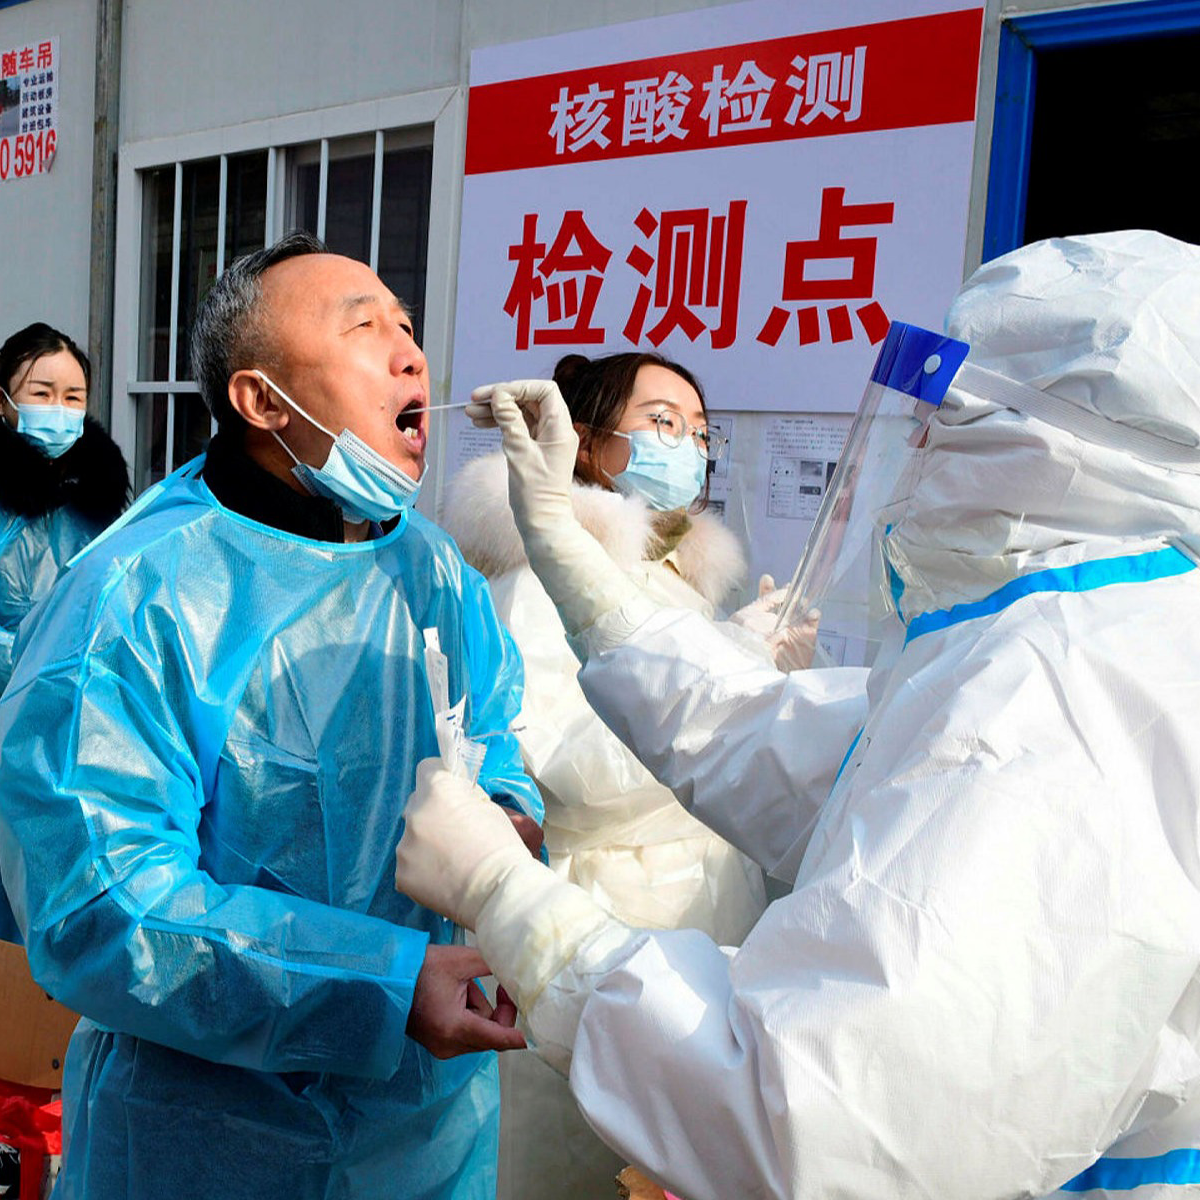 Russia and China Fight the Covid Outbreaks